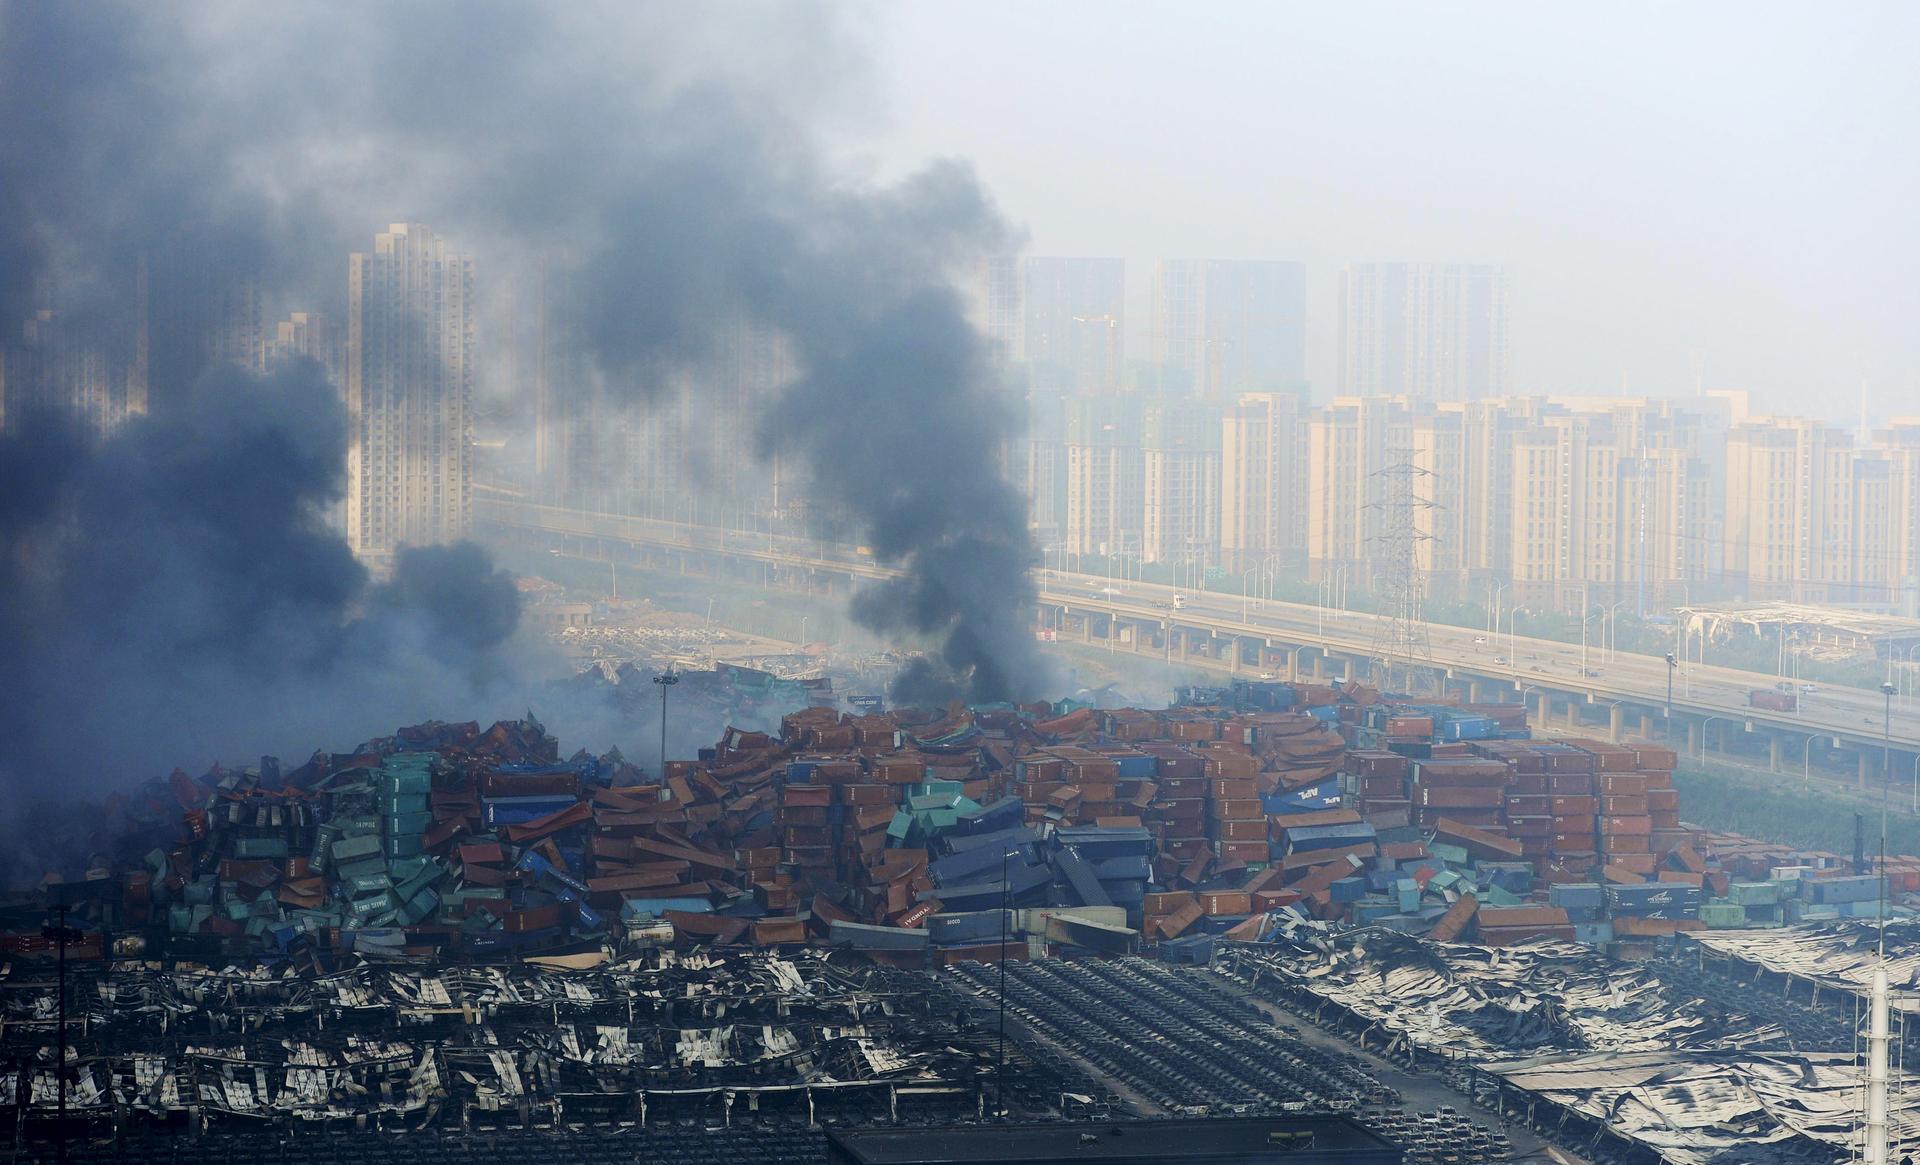 Smoke rises from shipping containers after explosions in Tianjin, China, August 13, 2015. Two massive explosions caused by flammable goods ripped through an industrial area in the northeast Chinese port city.